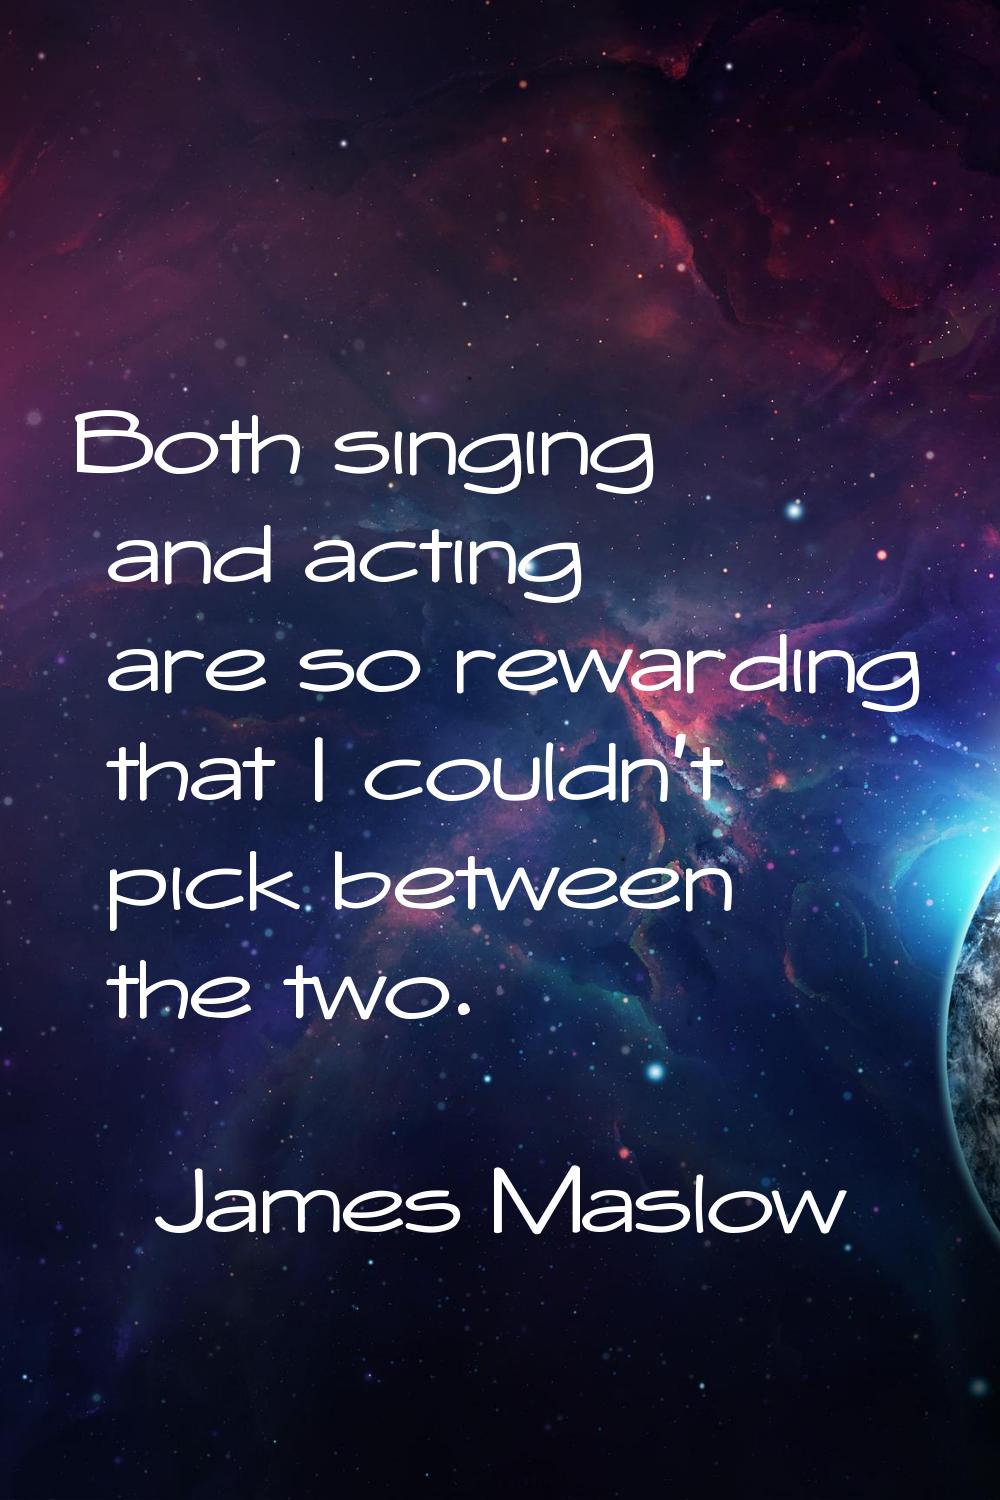 Both singing and acting are so rewarding that I couldn't pick between the two.